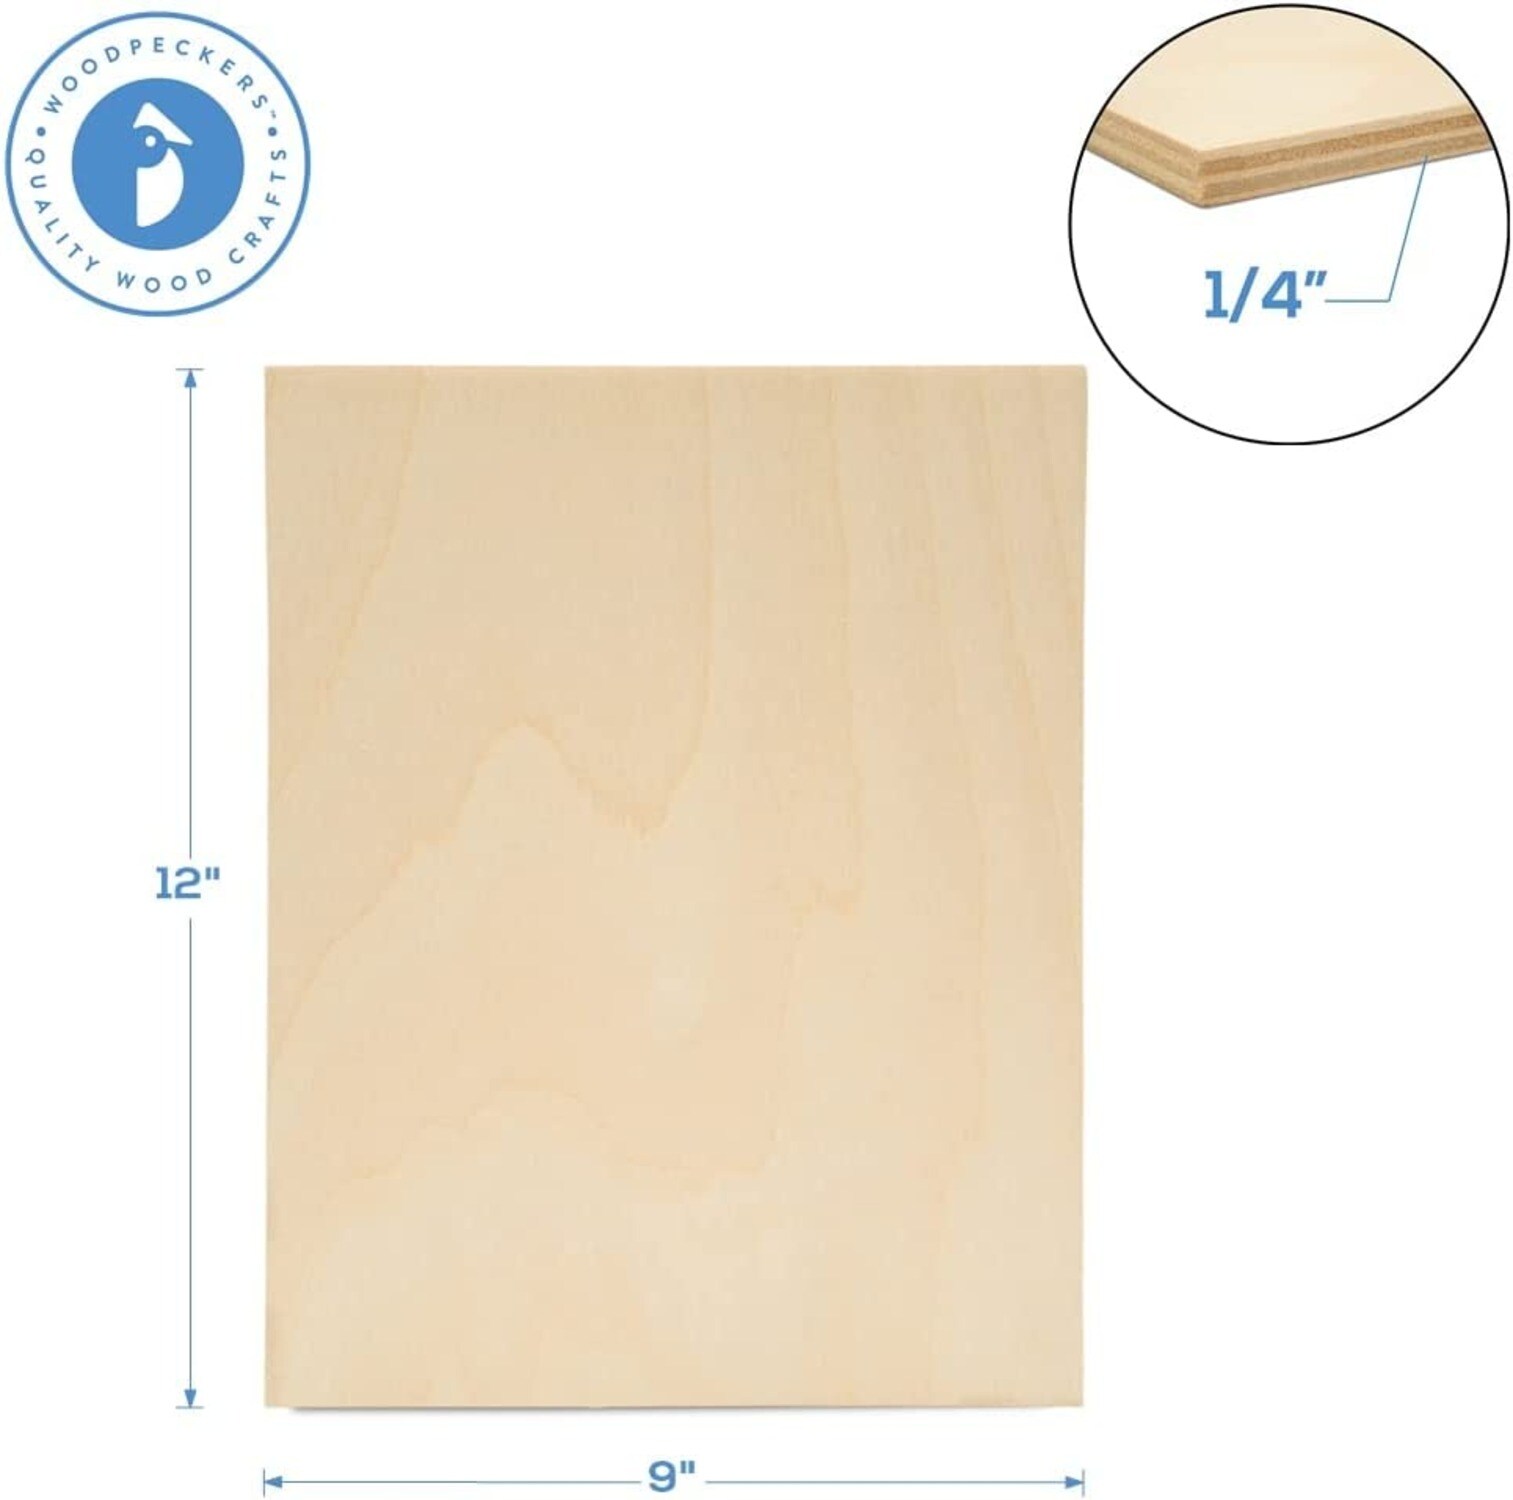  Baltic Birch Plywood, 3 mm 1/8 x 12 x 9 Inch Craft Wood, Bag of  8 B/BB Grade Baltic Birch Sheets, Perfect for Laser, CNC Cutting and Wood  Burning, by Woodpeckers 